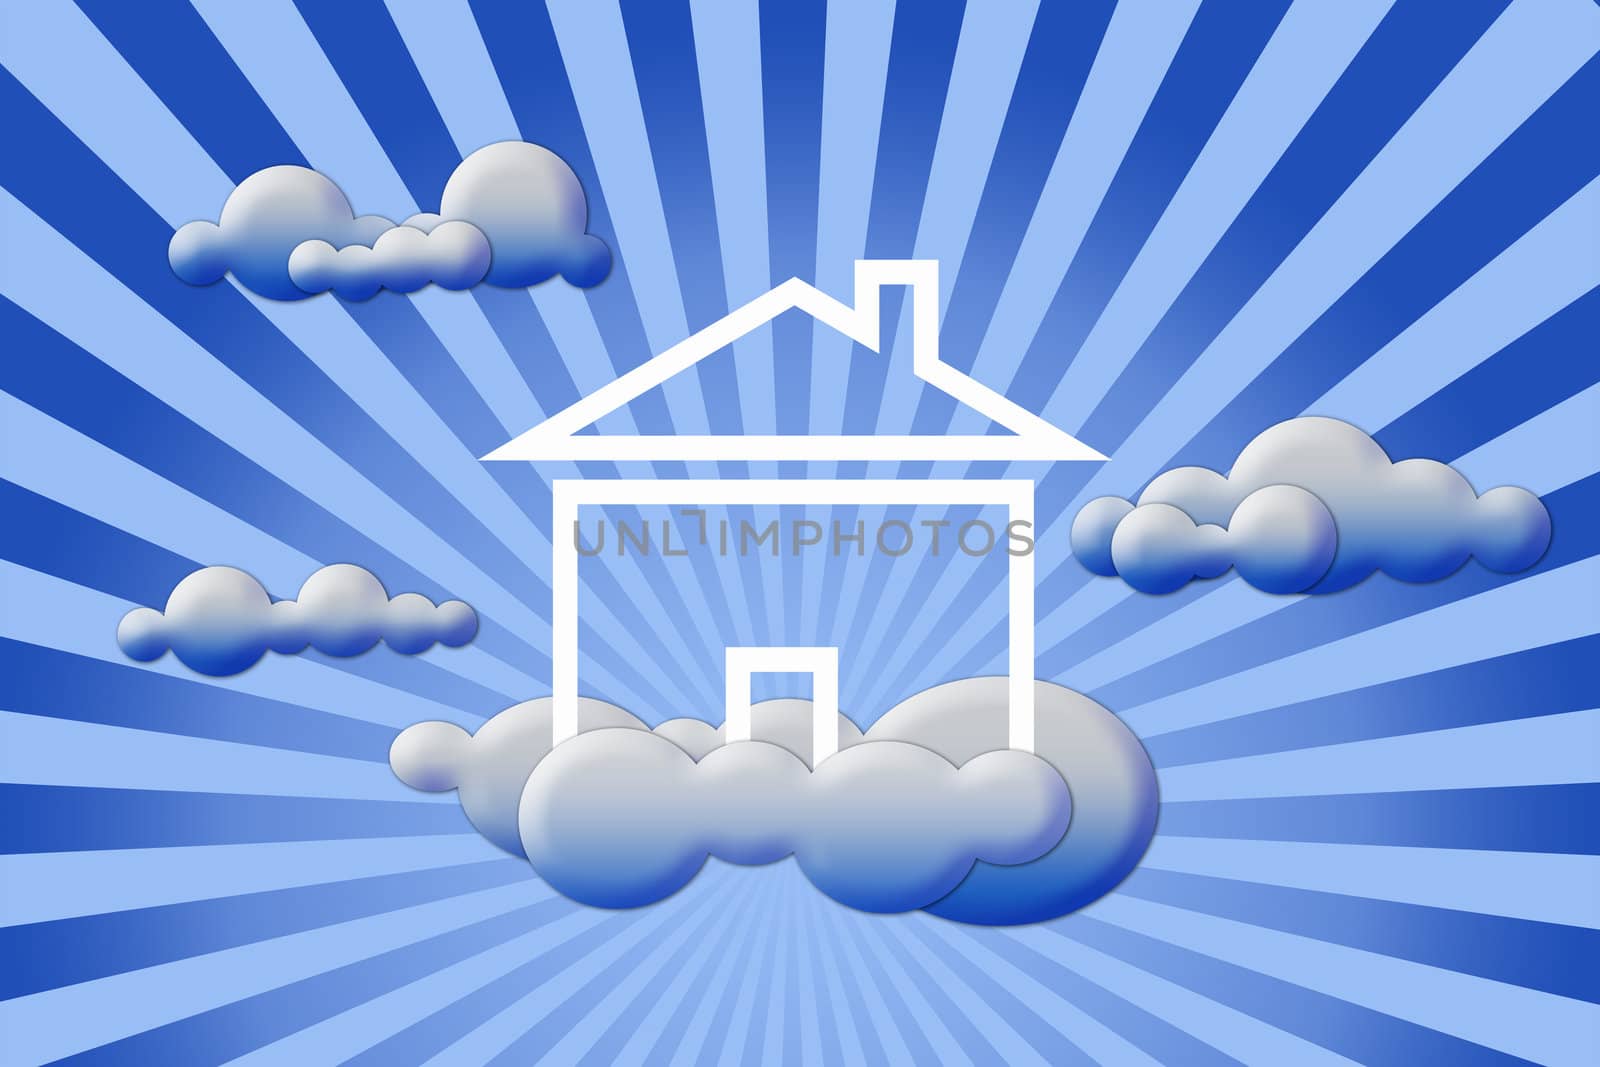 Conceptual image - House in clouds